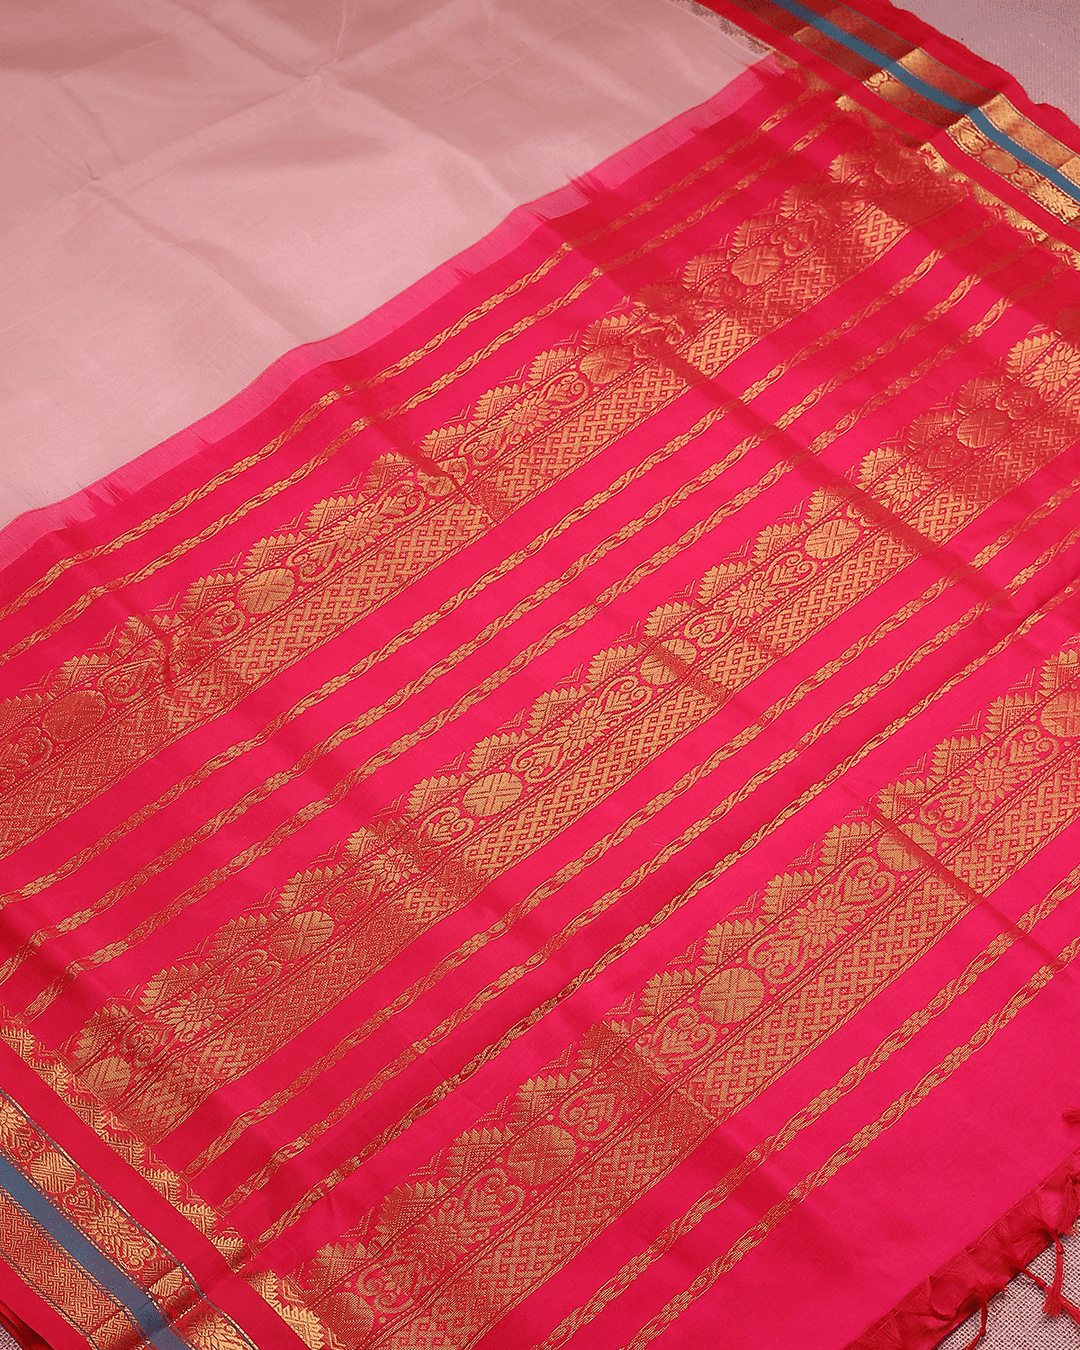 Peach Pink and Red Silk Cotton Saree - D8238 - View 6